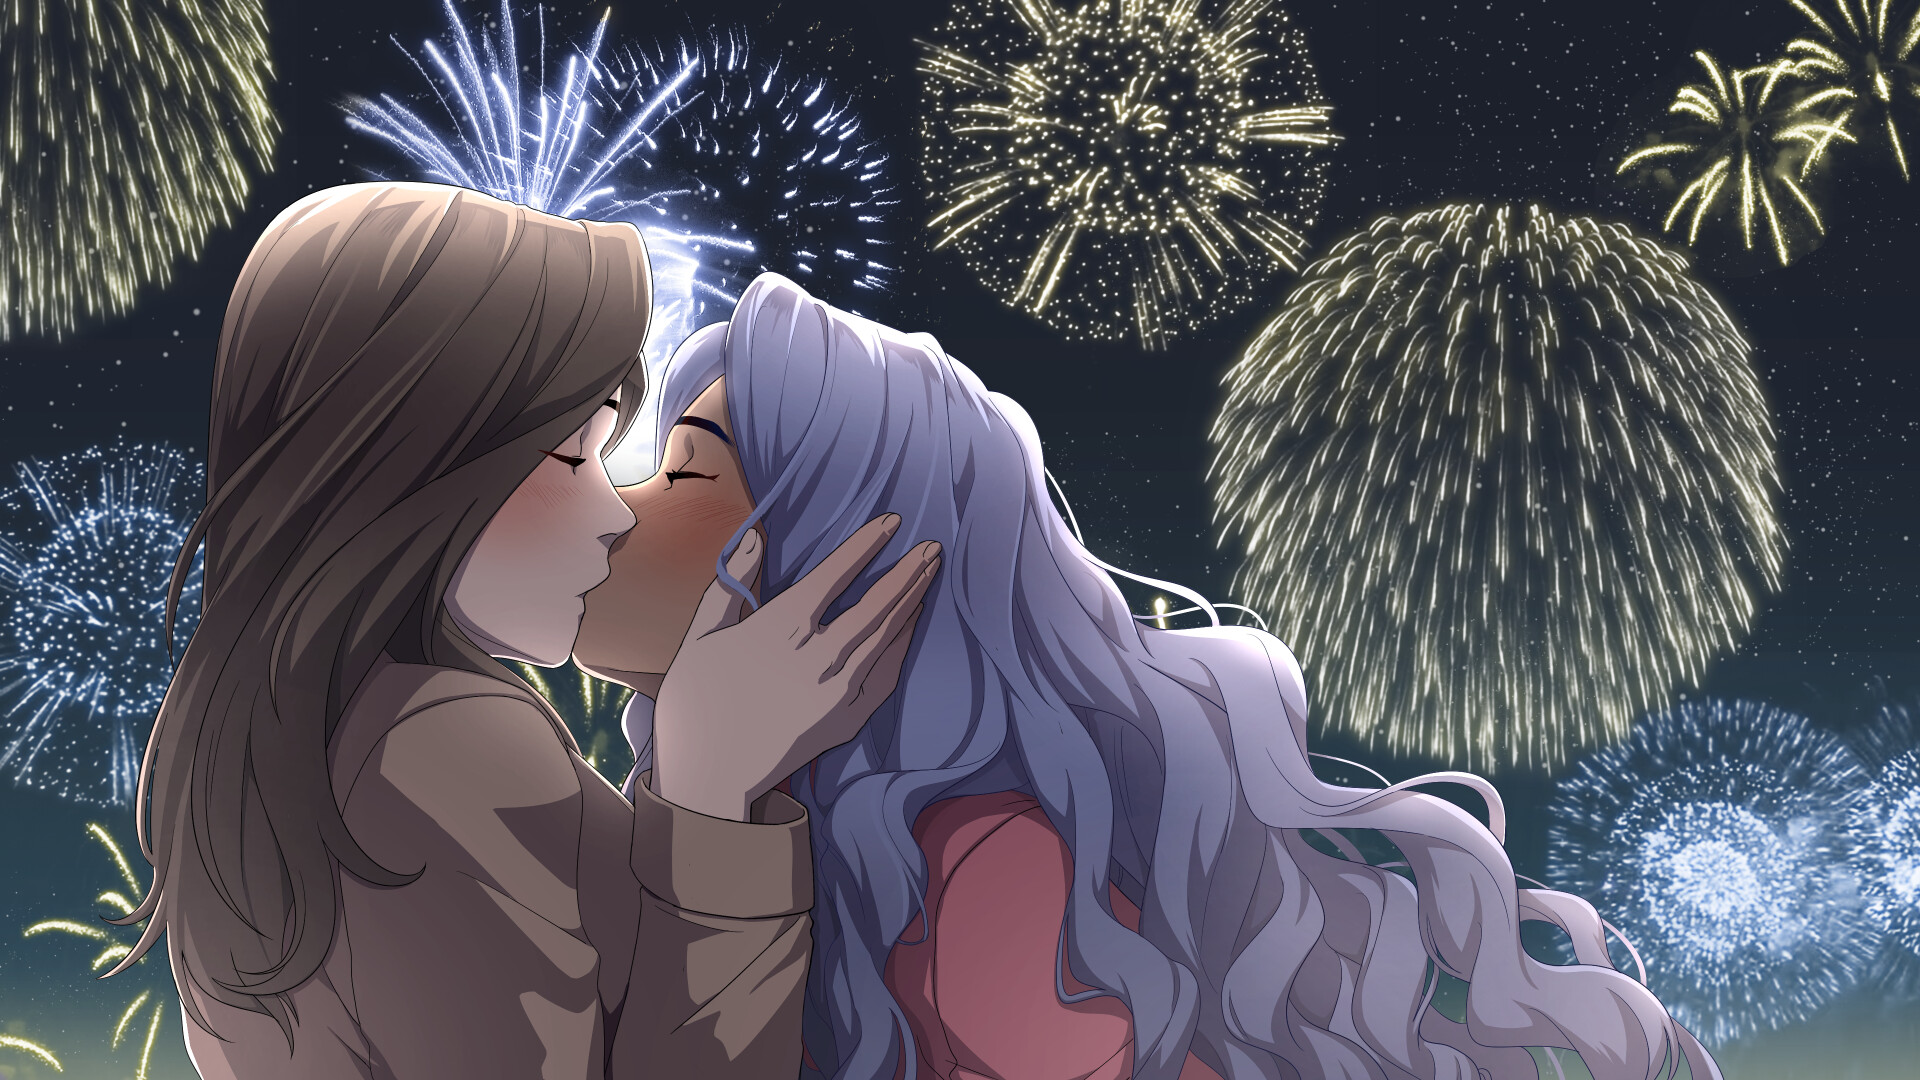 Bisexual Twins’ Romance Competition Visual Novel ‘Trouble Comes Twice’ Coming to Steam in July; itch Next Week